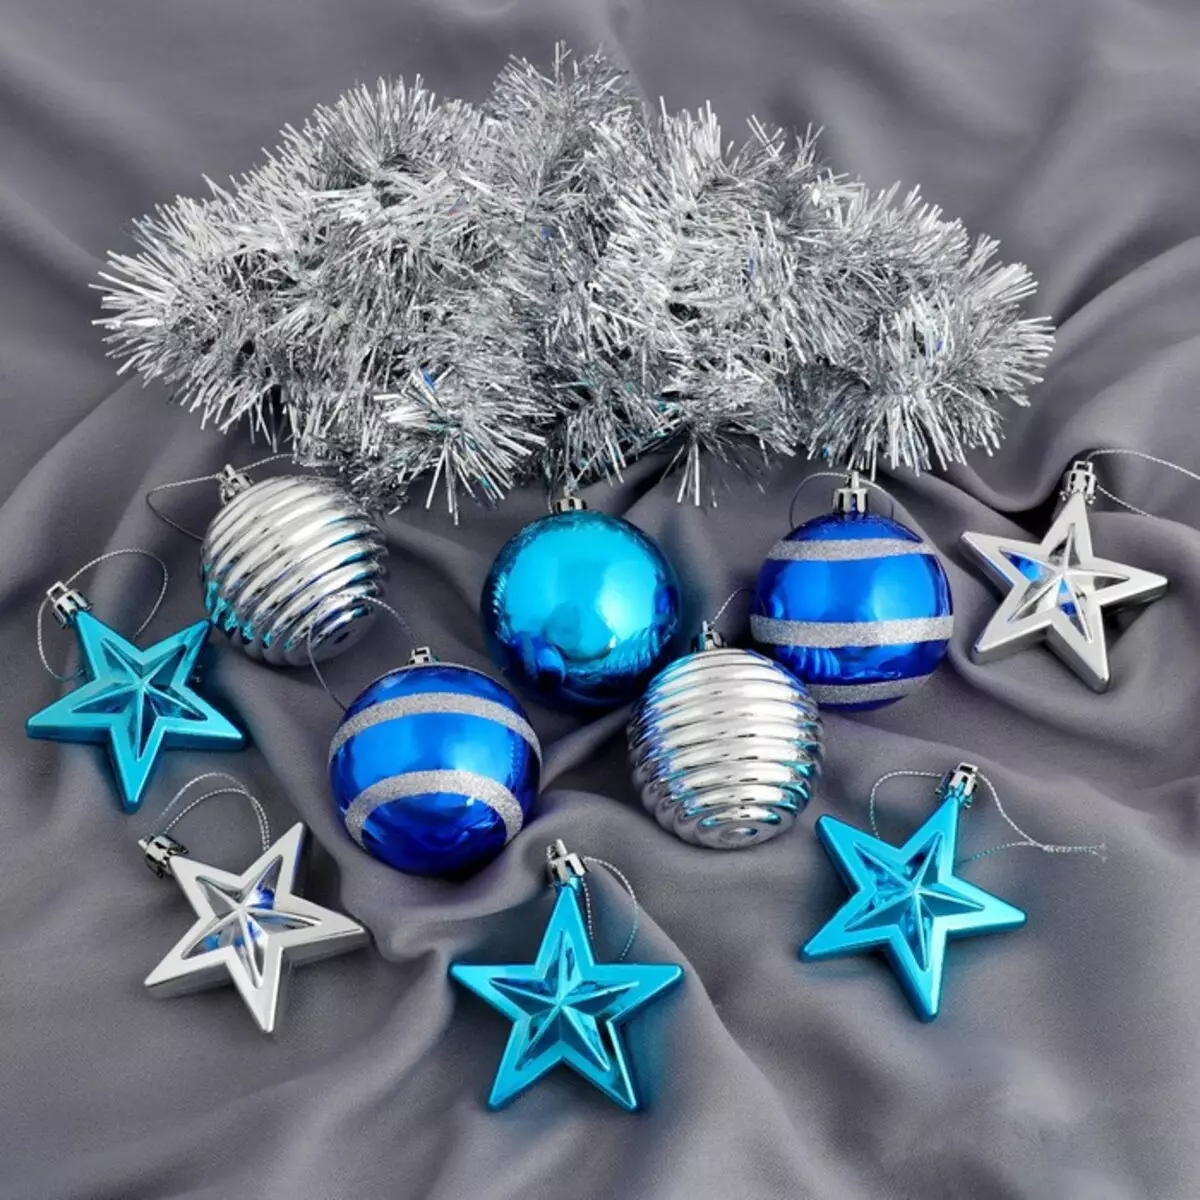 How to decorate the Christmas tree in blue-silver color? 30 photos How to dress up with balls and other decorations in blue and silver tones? 7627_20